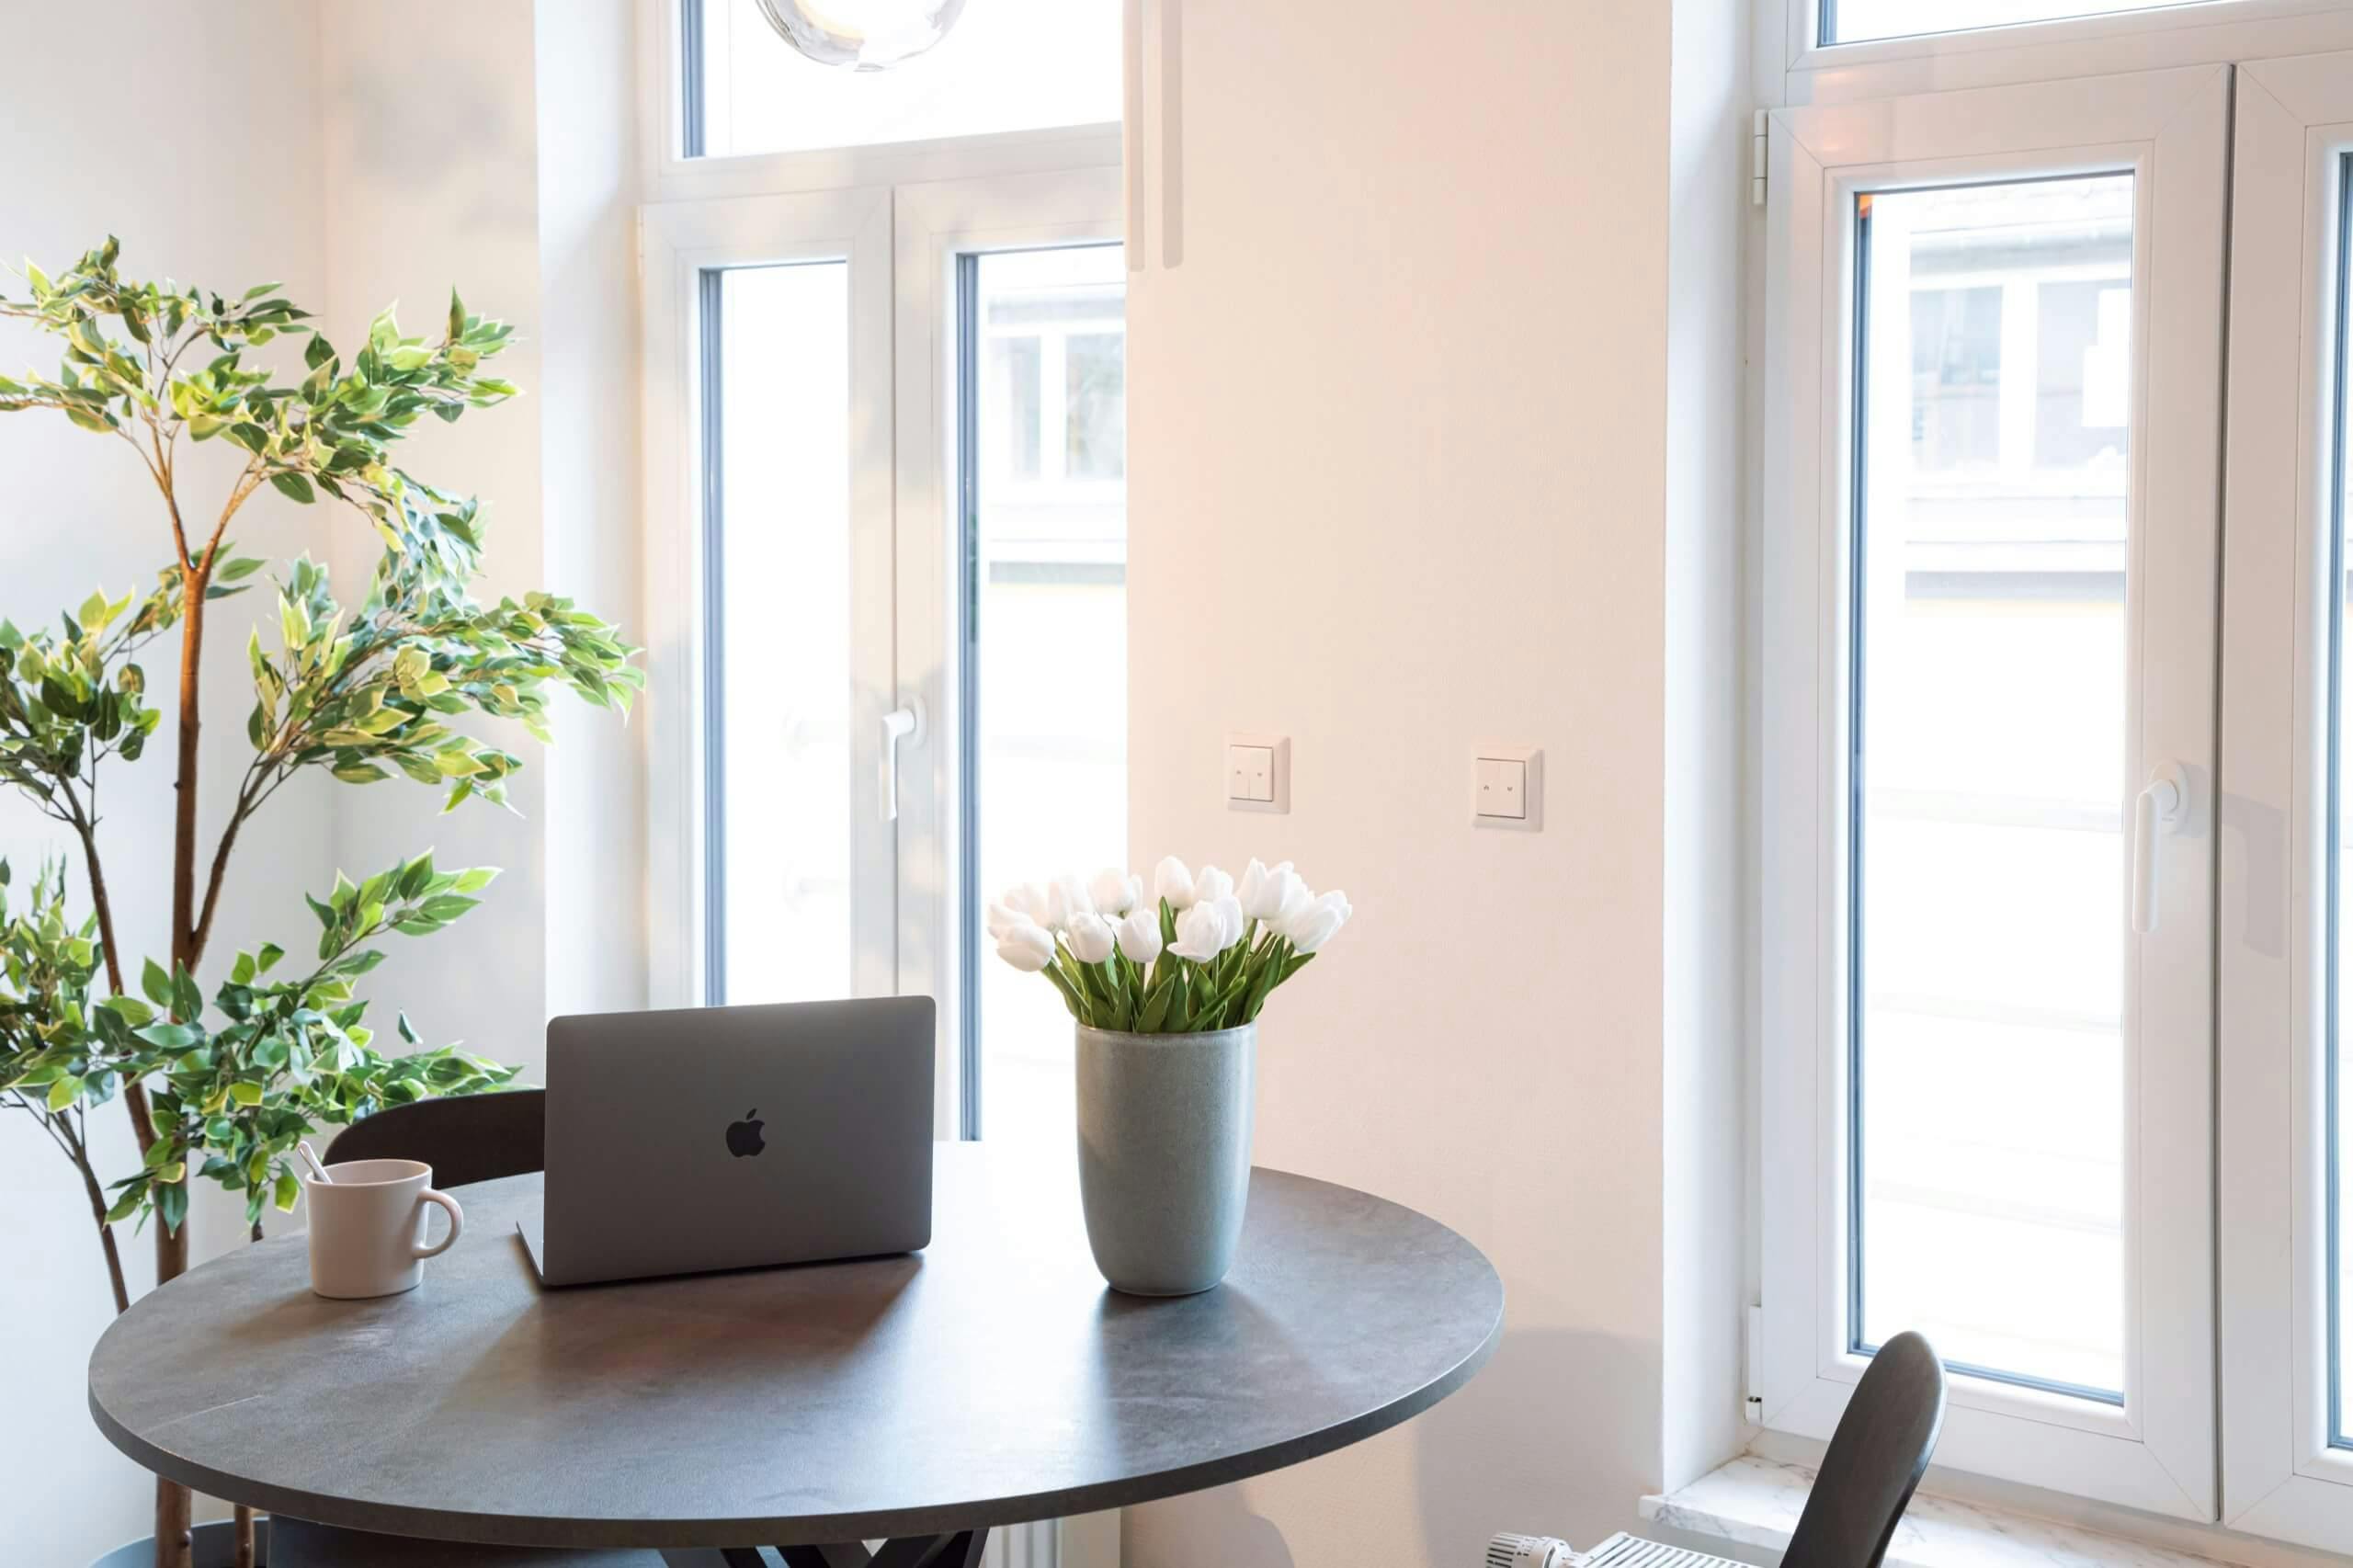 The inside of an apartment looking towards the 2 windows.  In front there is a table with 2 chairs. Sitting on top of the table is a macbook pro, a vase with white tulips and a coffee cup.  Next to the window is a large green plant.